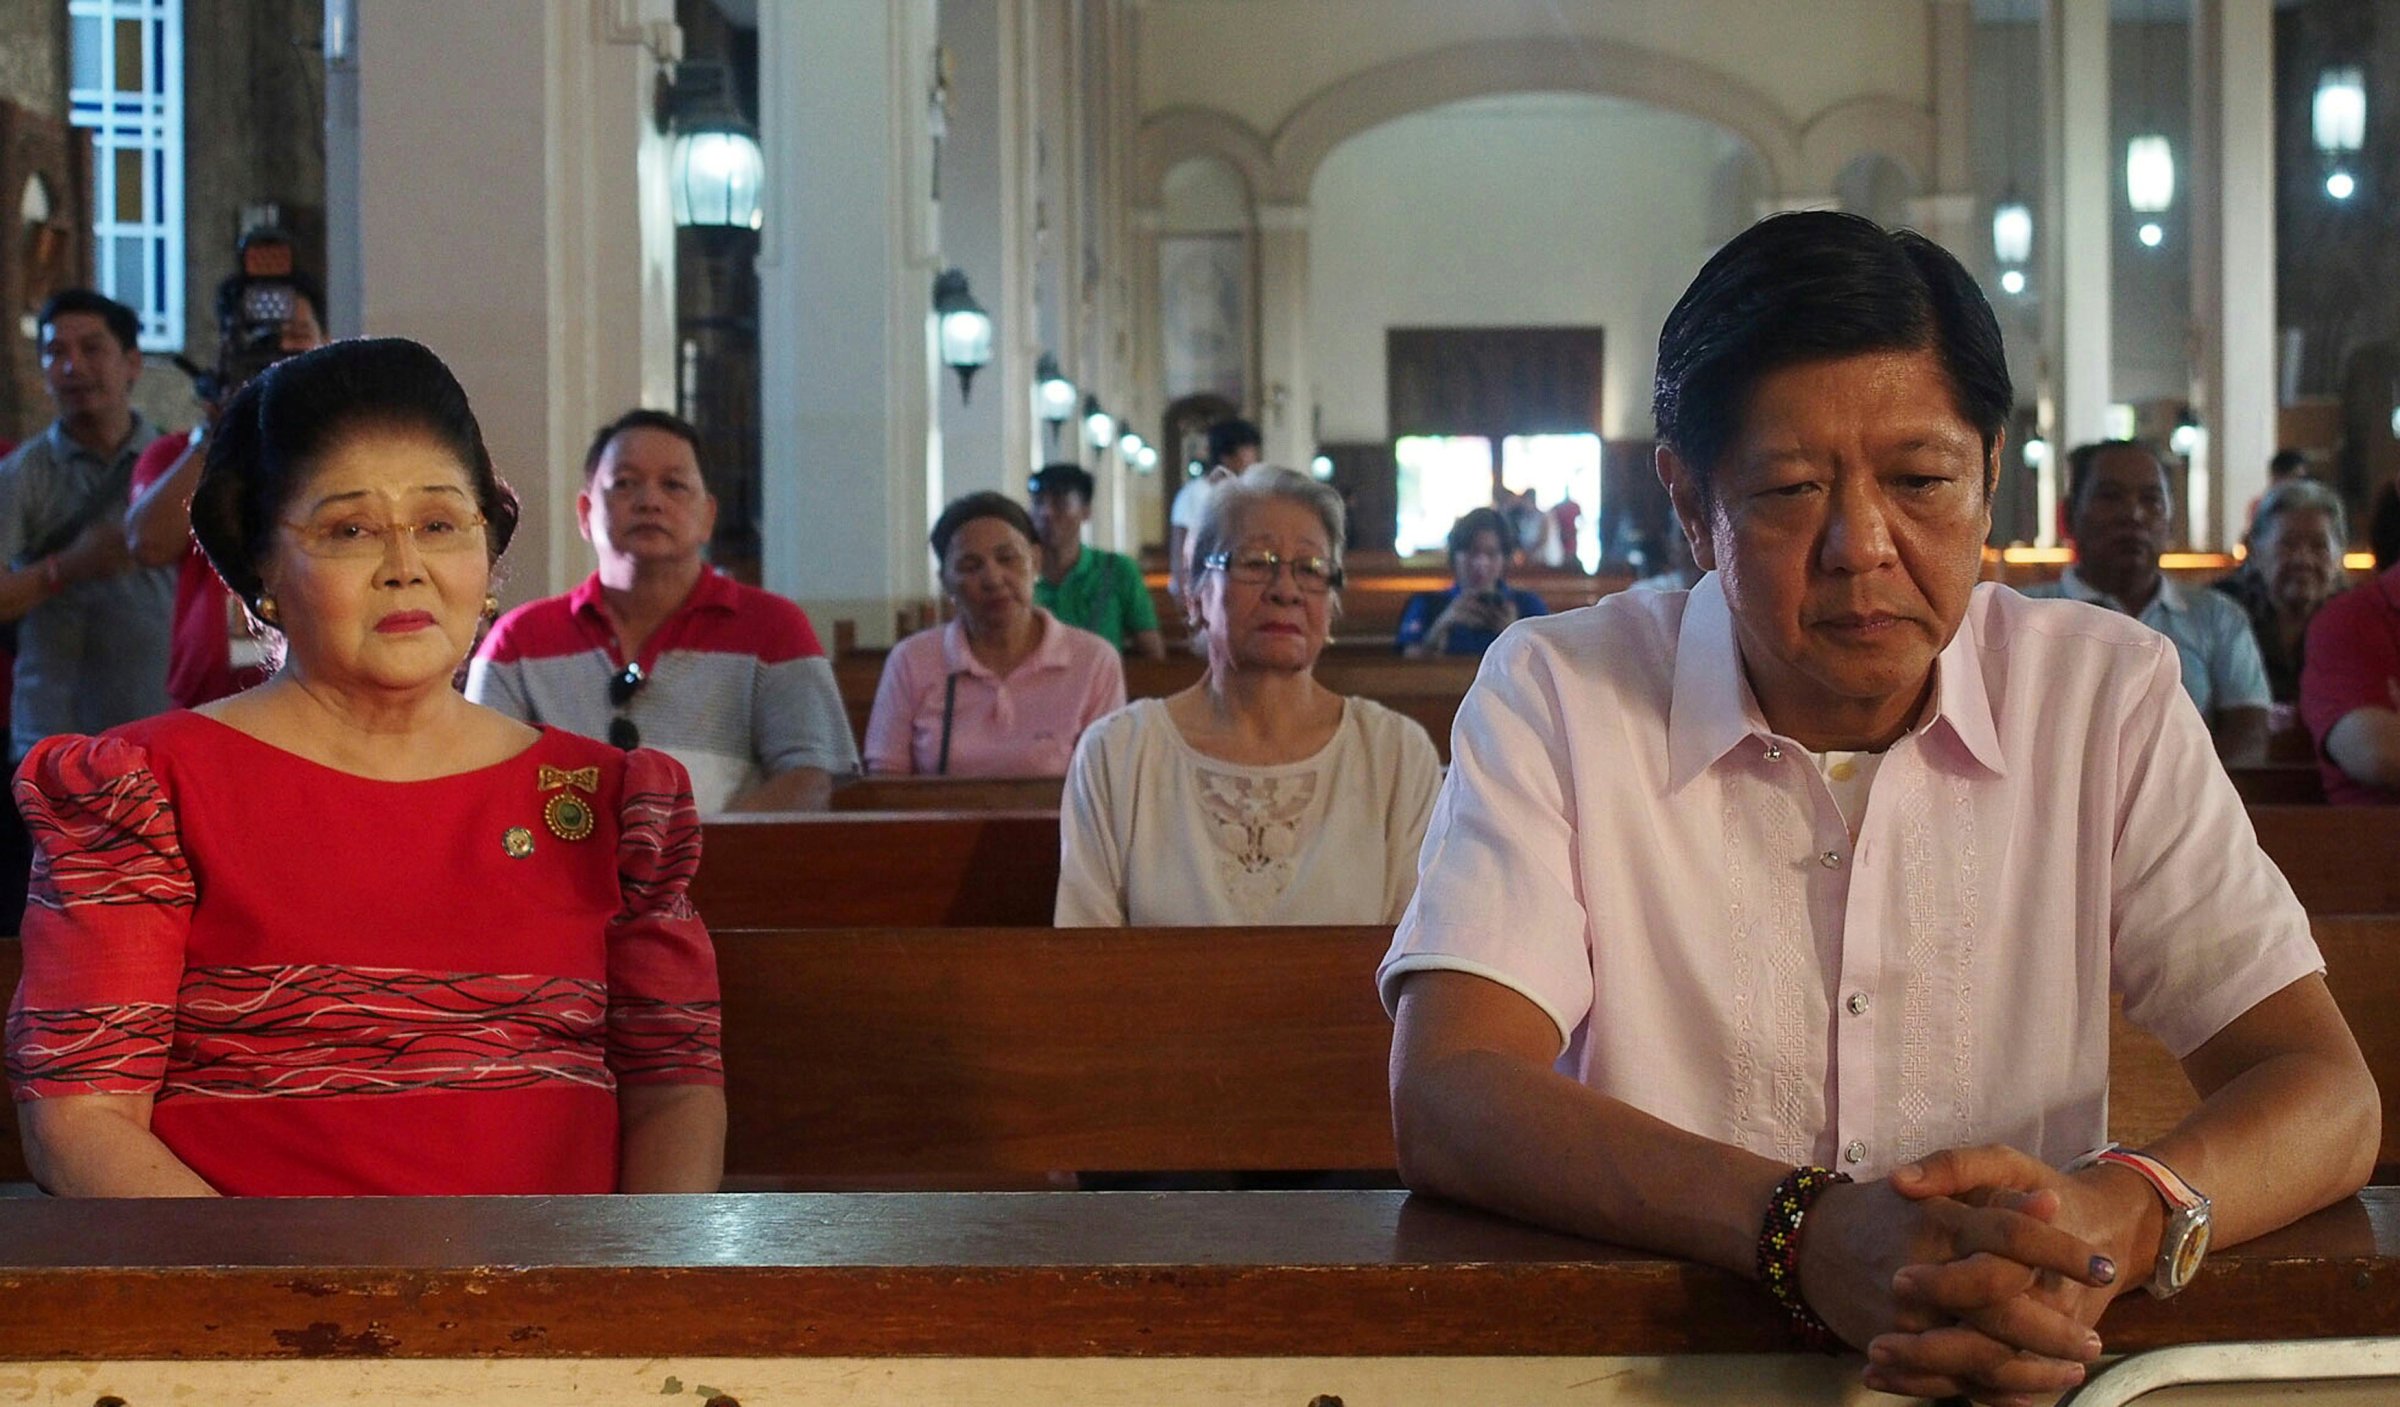 Philippine vice-presidential candidate and senator Ferdinand "BongBong" Marcos, son and namesake of late dictator former President Ferdinand Marcos, attends a mass with his mother in Batac, Ilocos Norte province, north of Manila